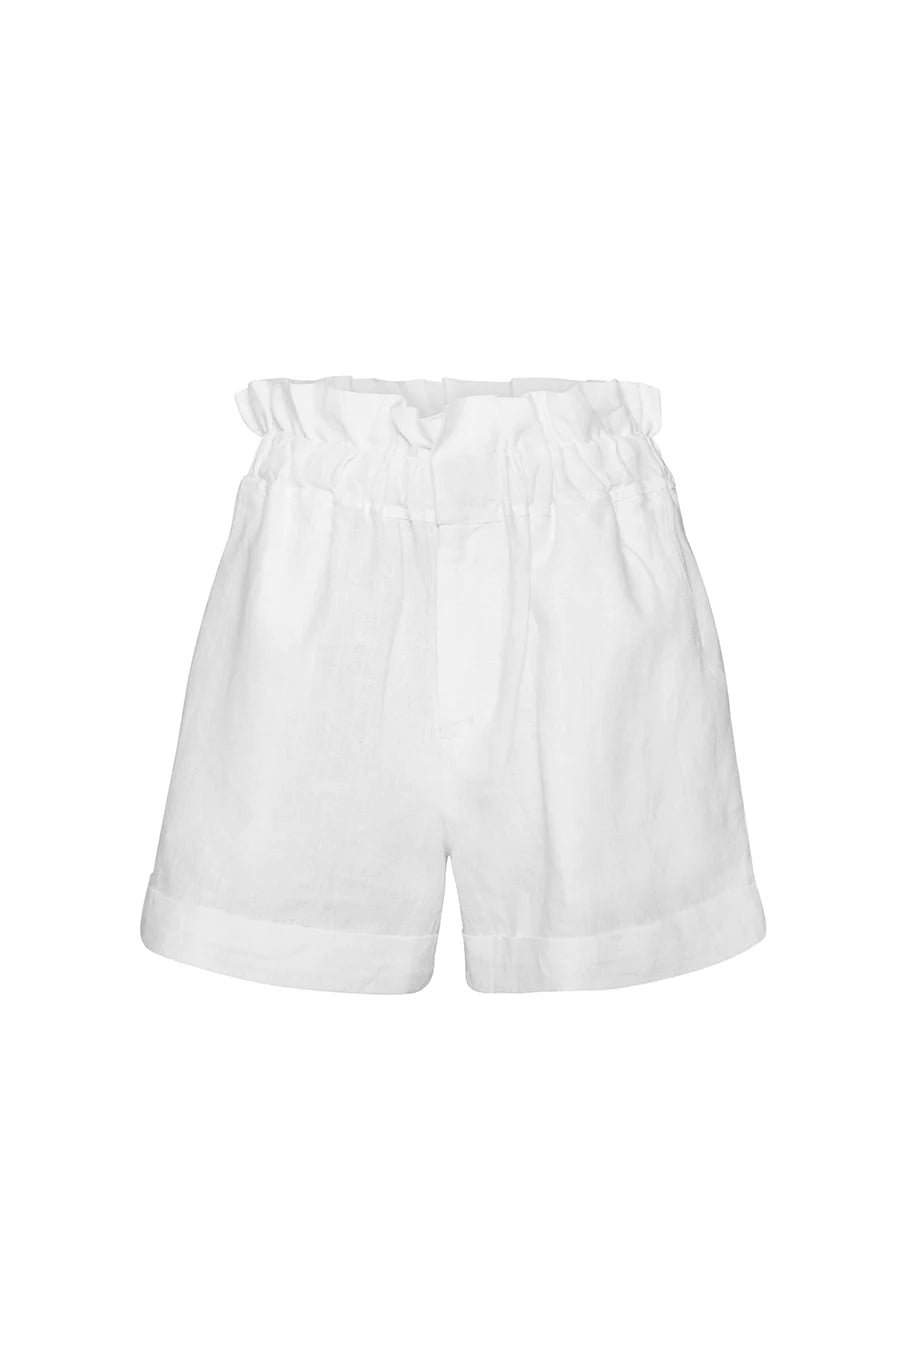 Ducky Shorts in Ivory